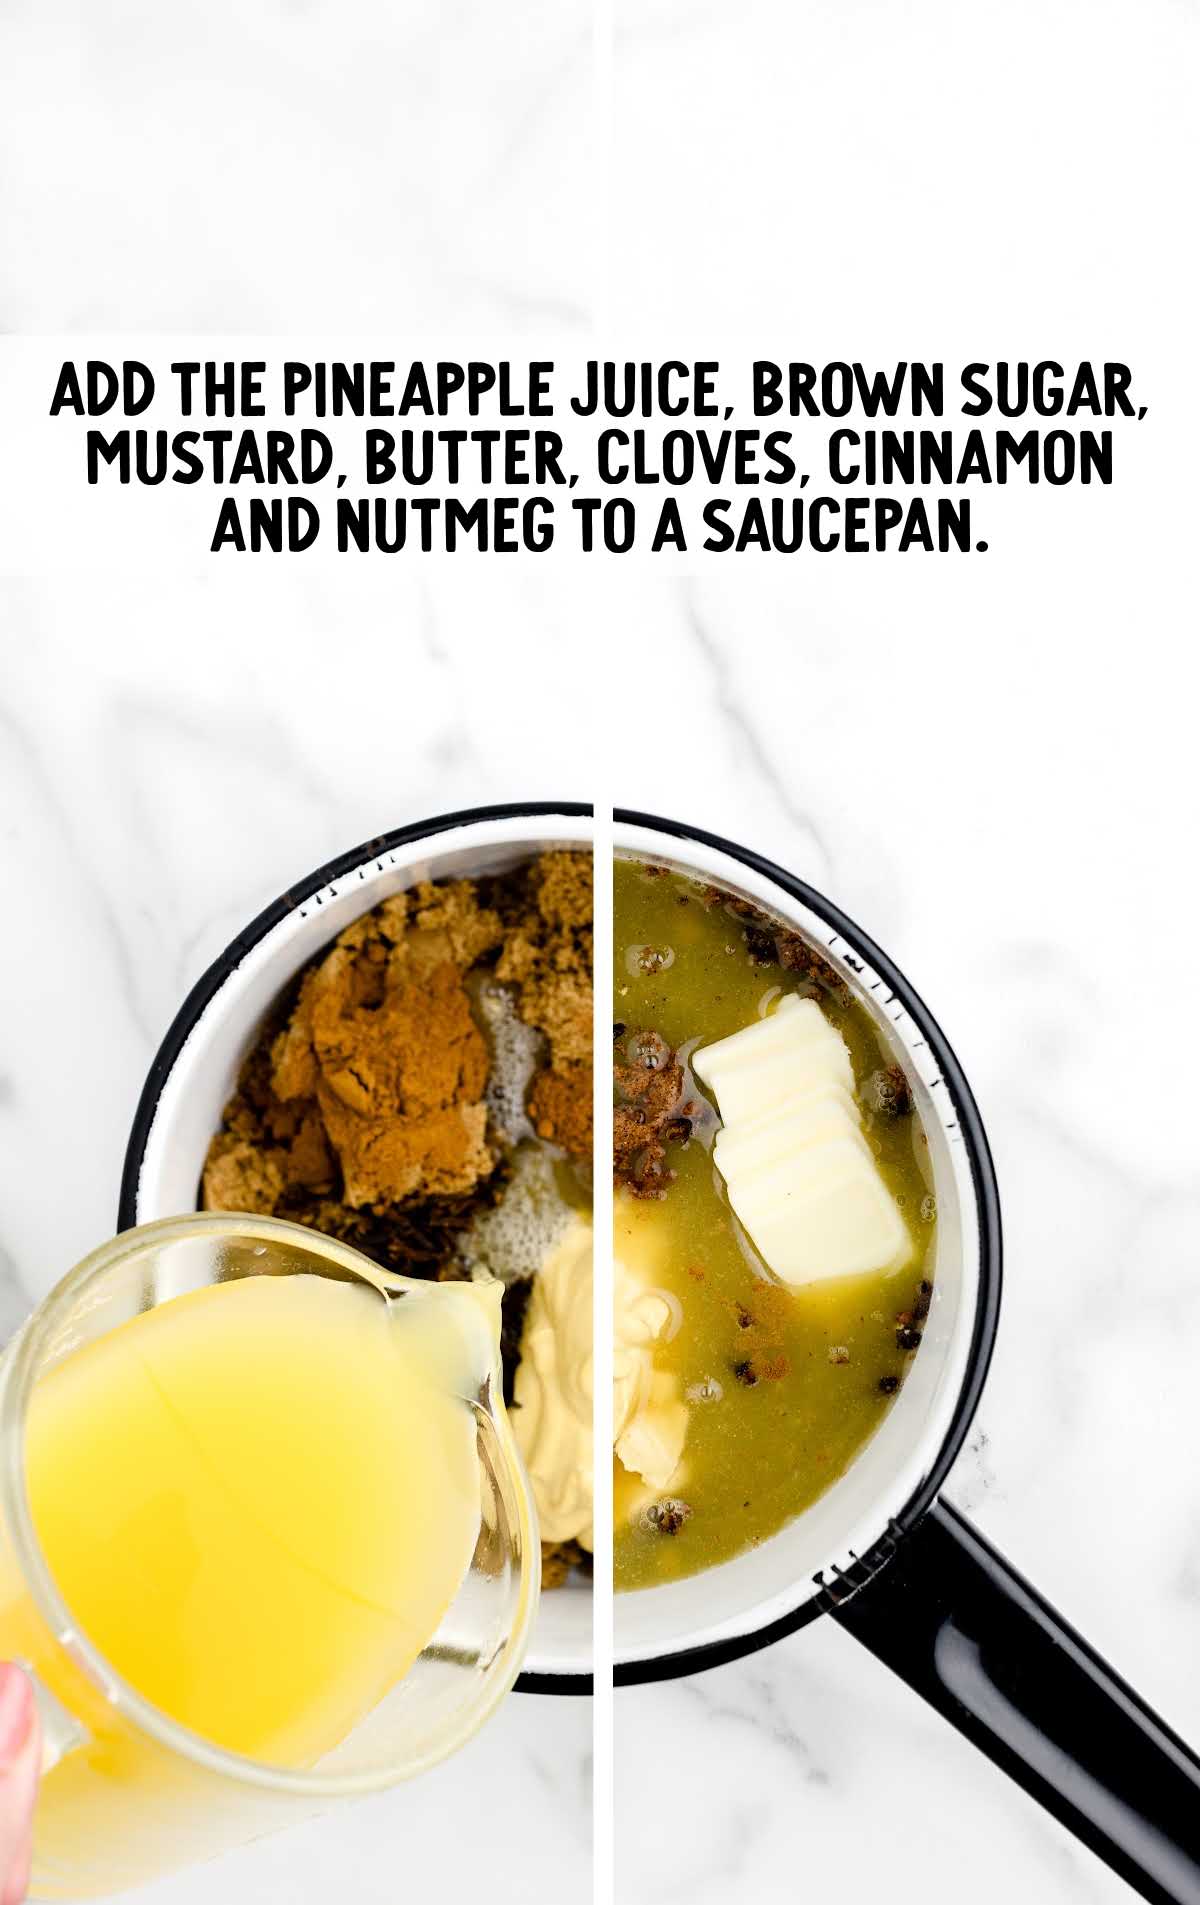 pineapple juice, brown sugar, mustard, butter, cloves, cinnamon and nutmeg added to a saucepan